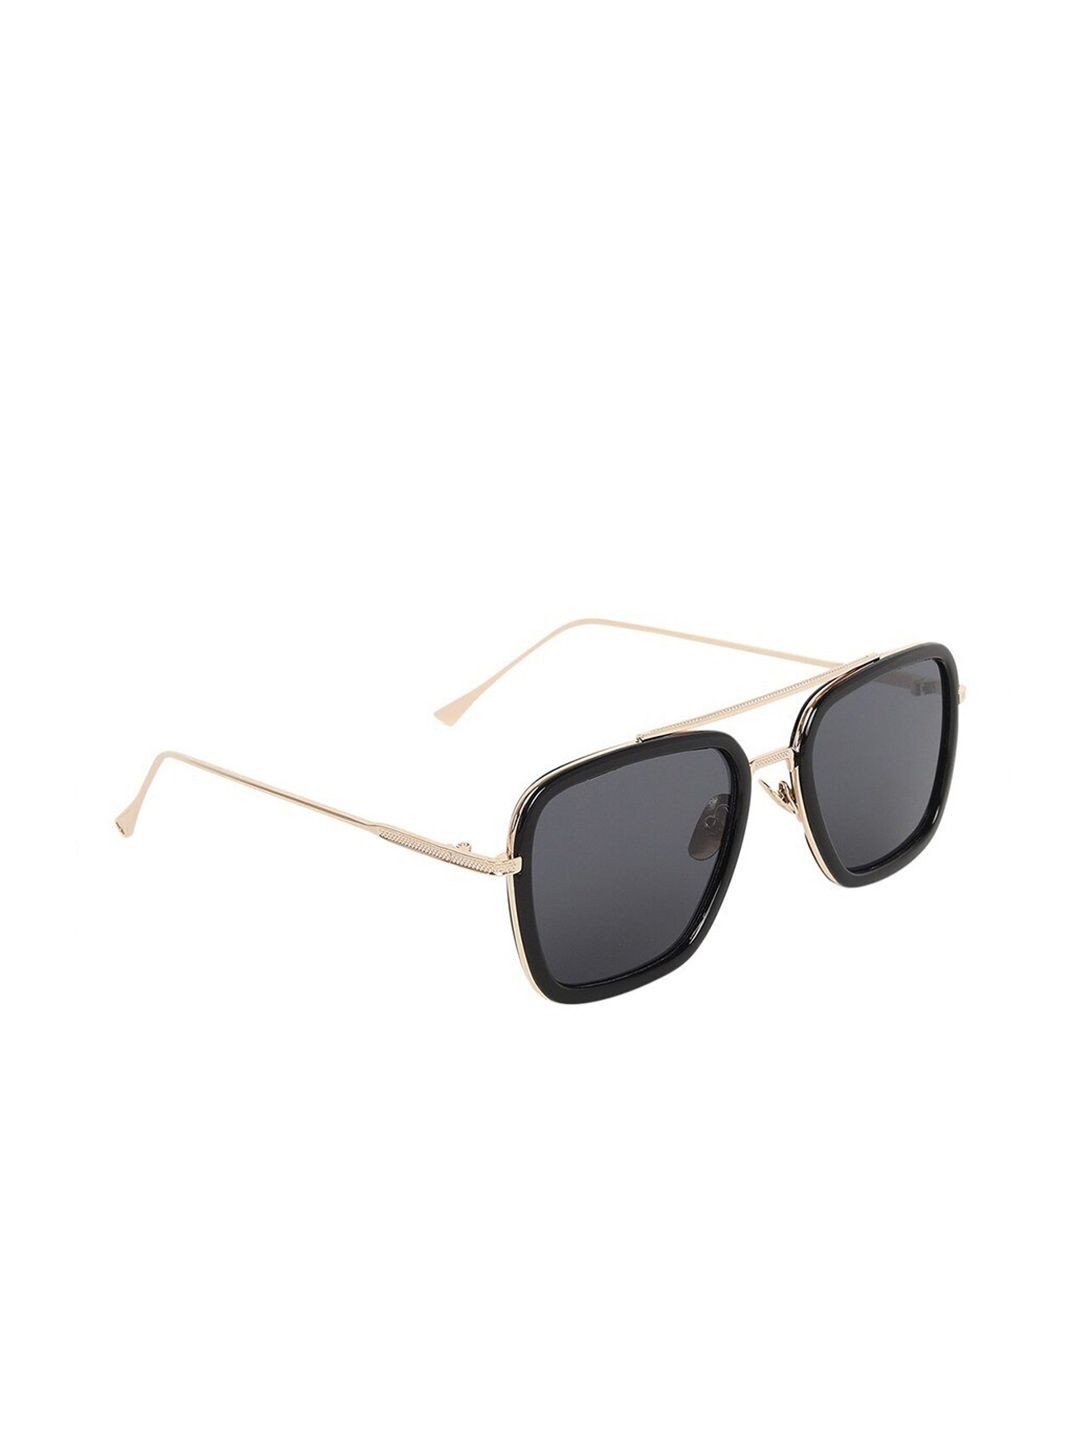 Creature Unisex Black Lens & Gold-Toned Square Sunglasses with UV Protected Lens Price in India